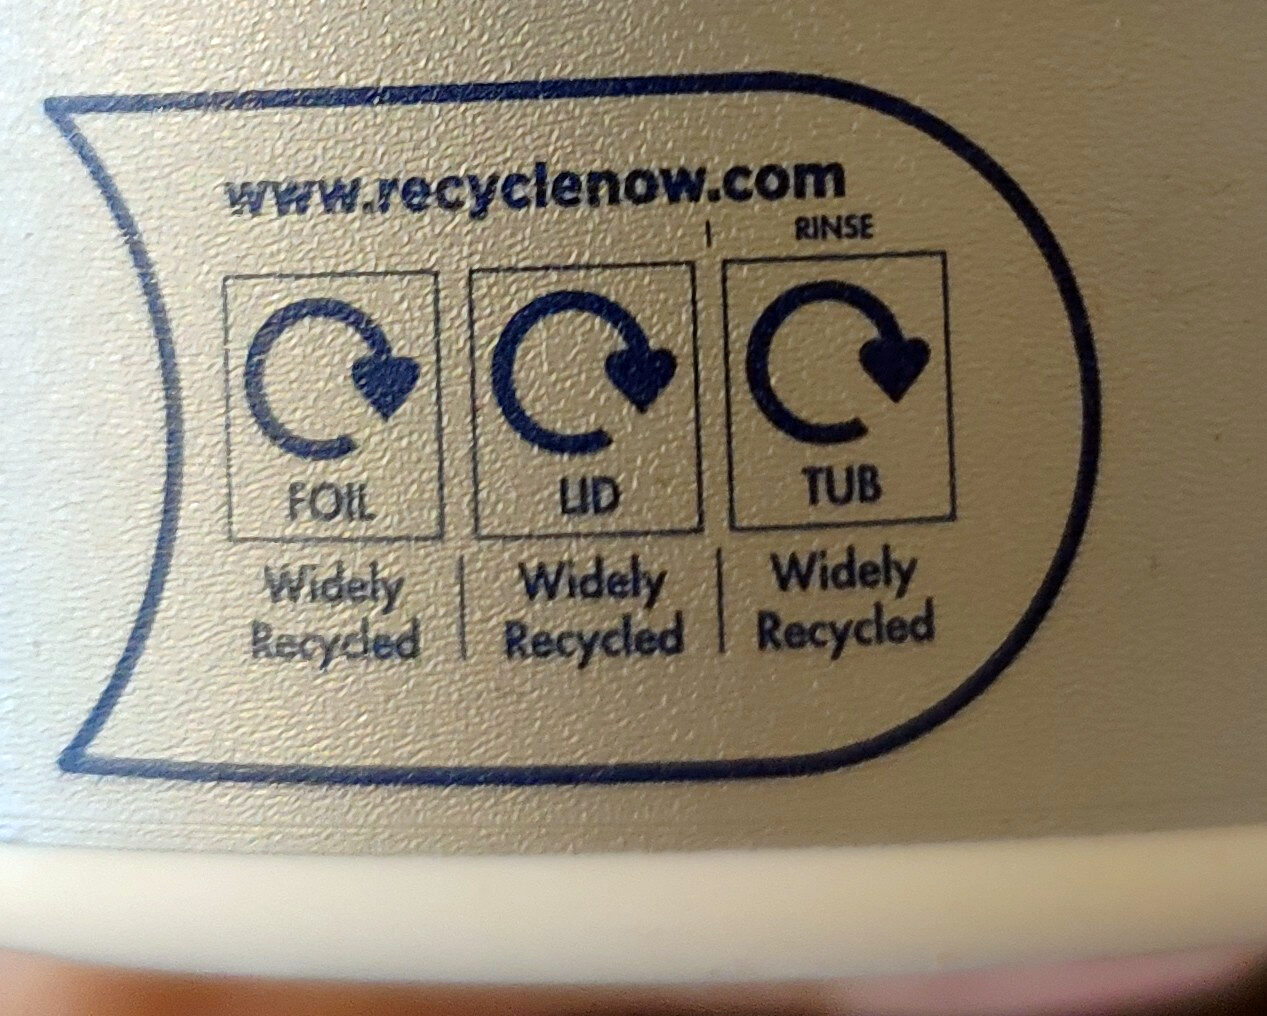 Original - Recycling instructions and/or packaging information